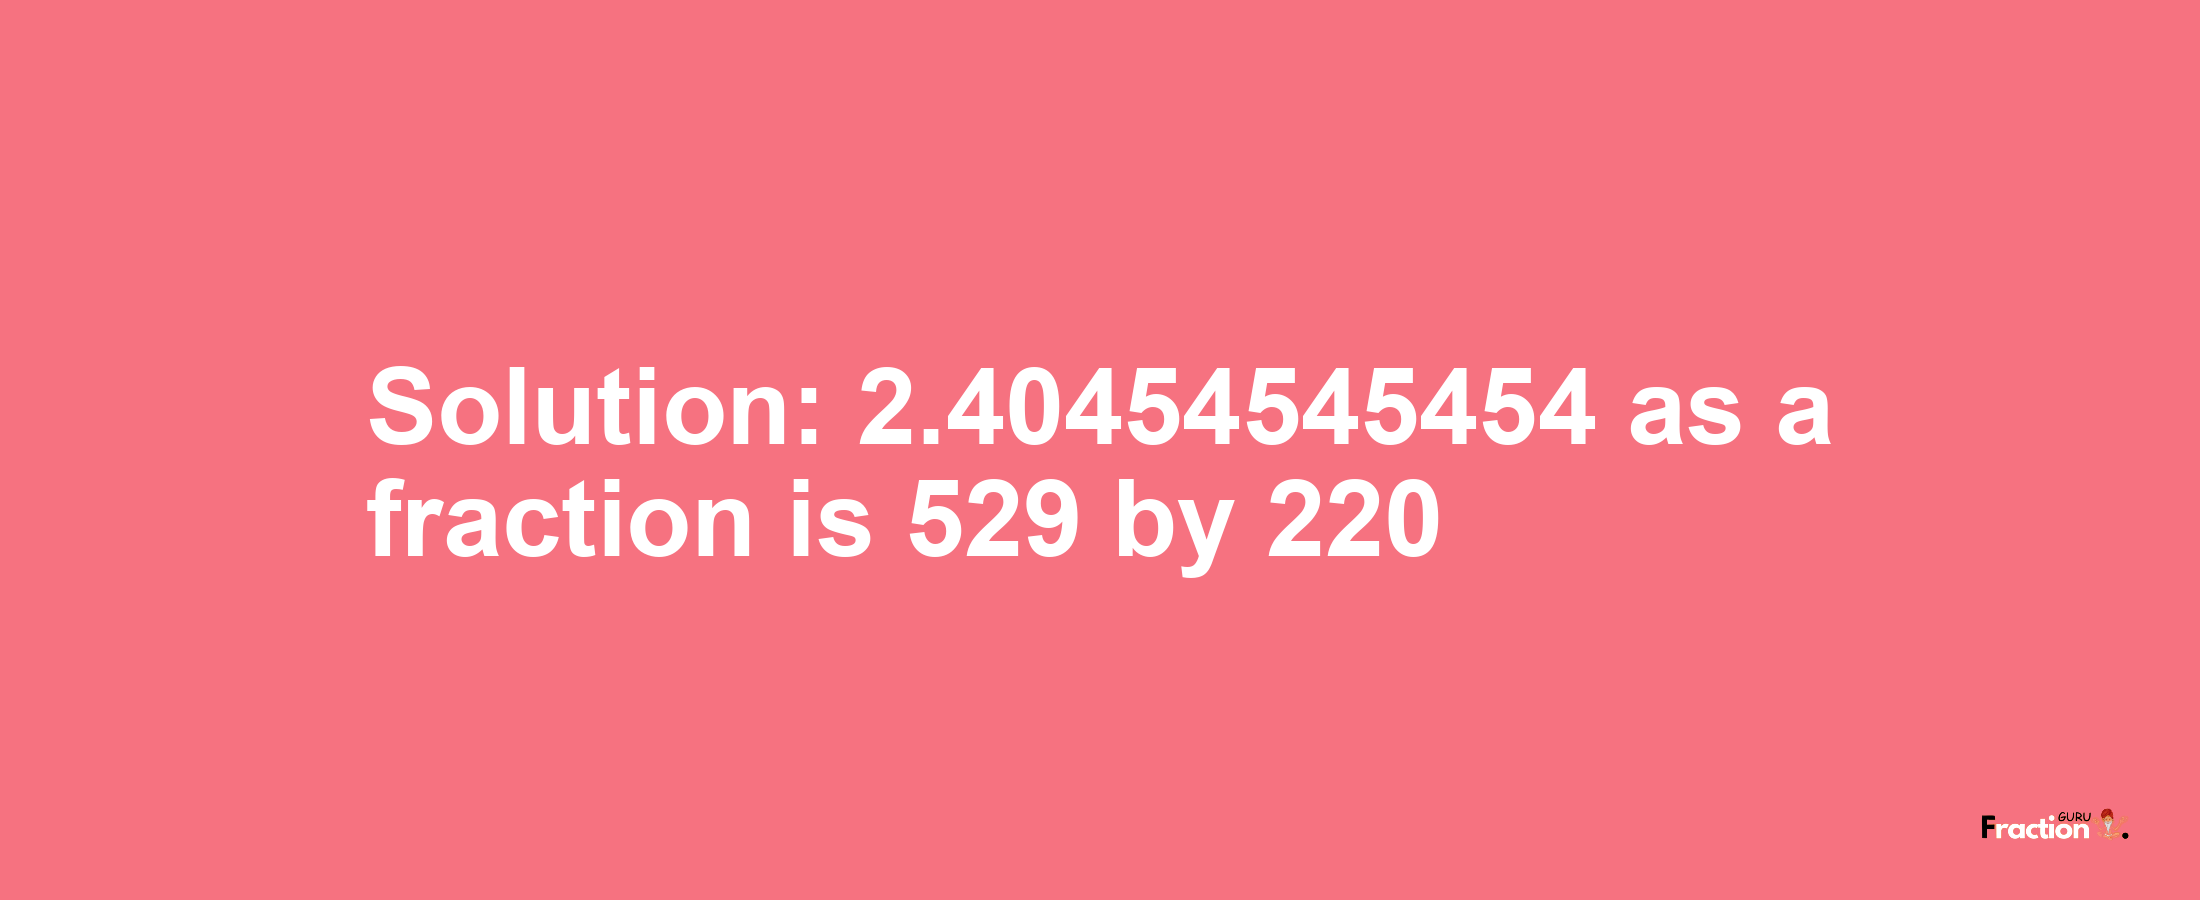 Solution:2.40454545454 as a fraction is 529/220